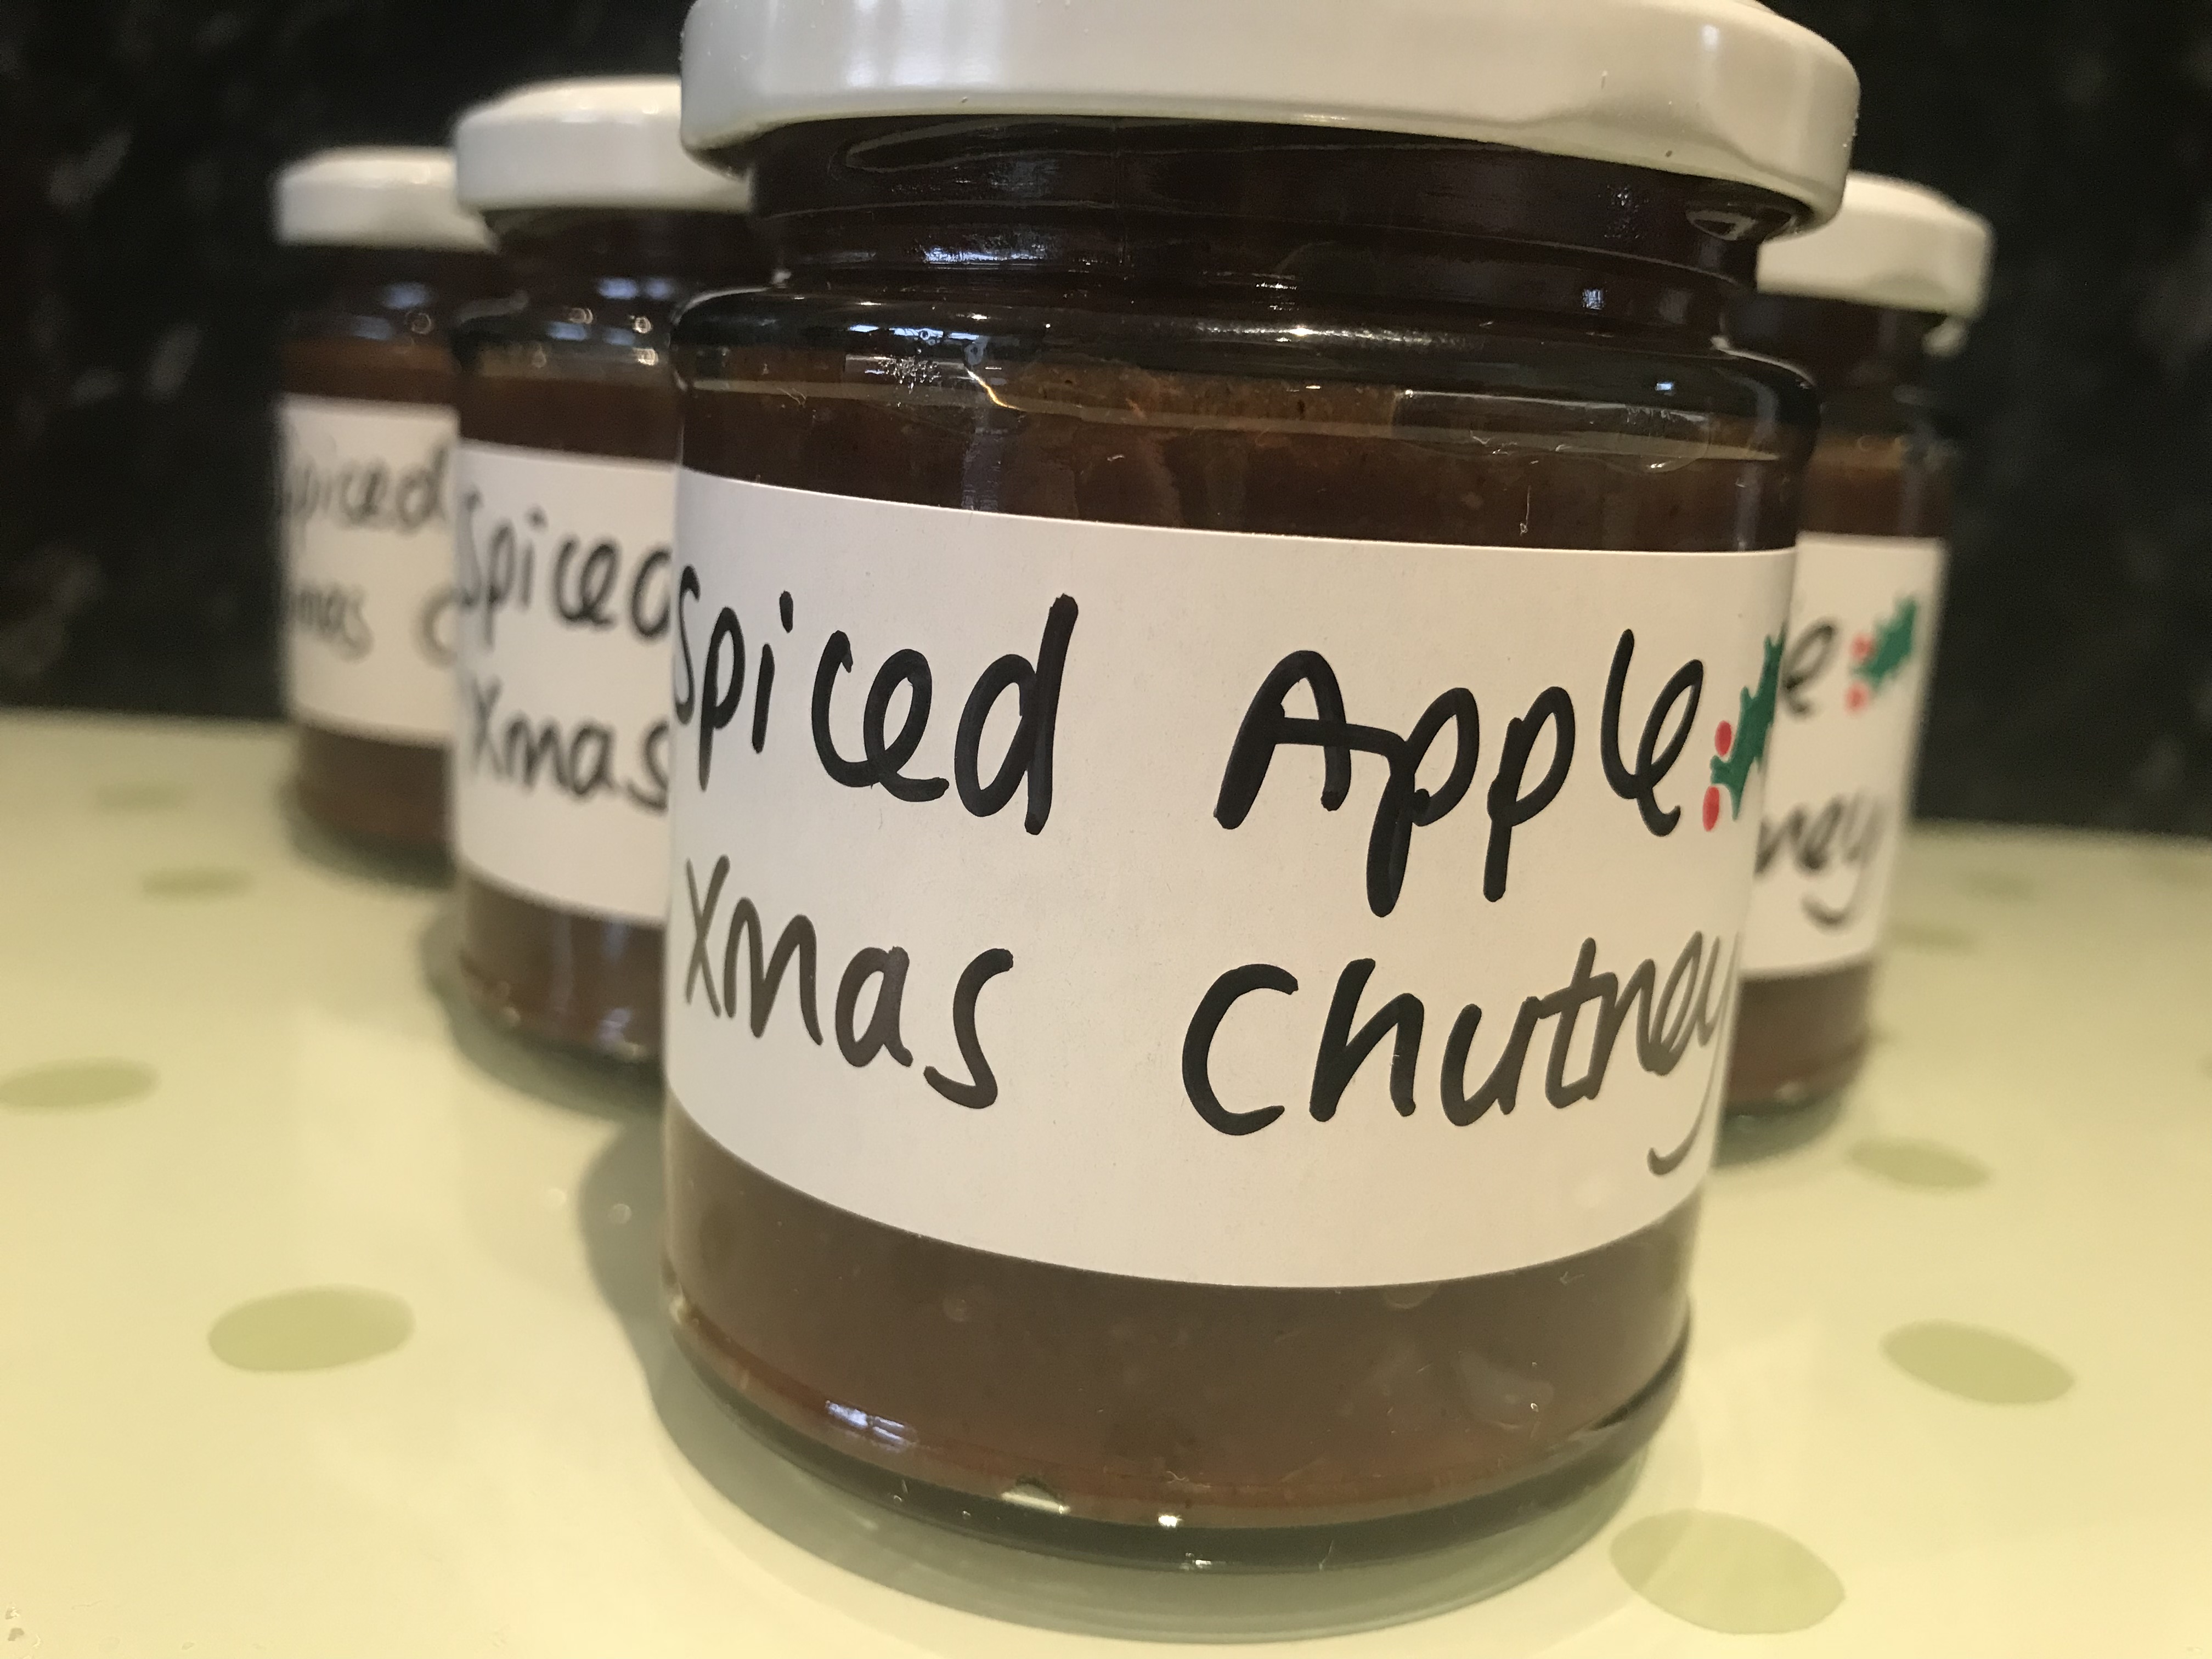 It’s beginning to look a lot like Christmas……. Chutney